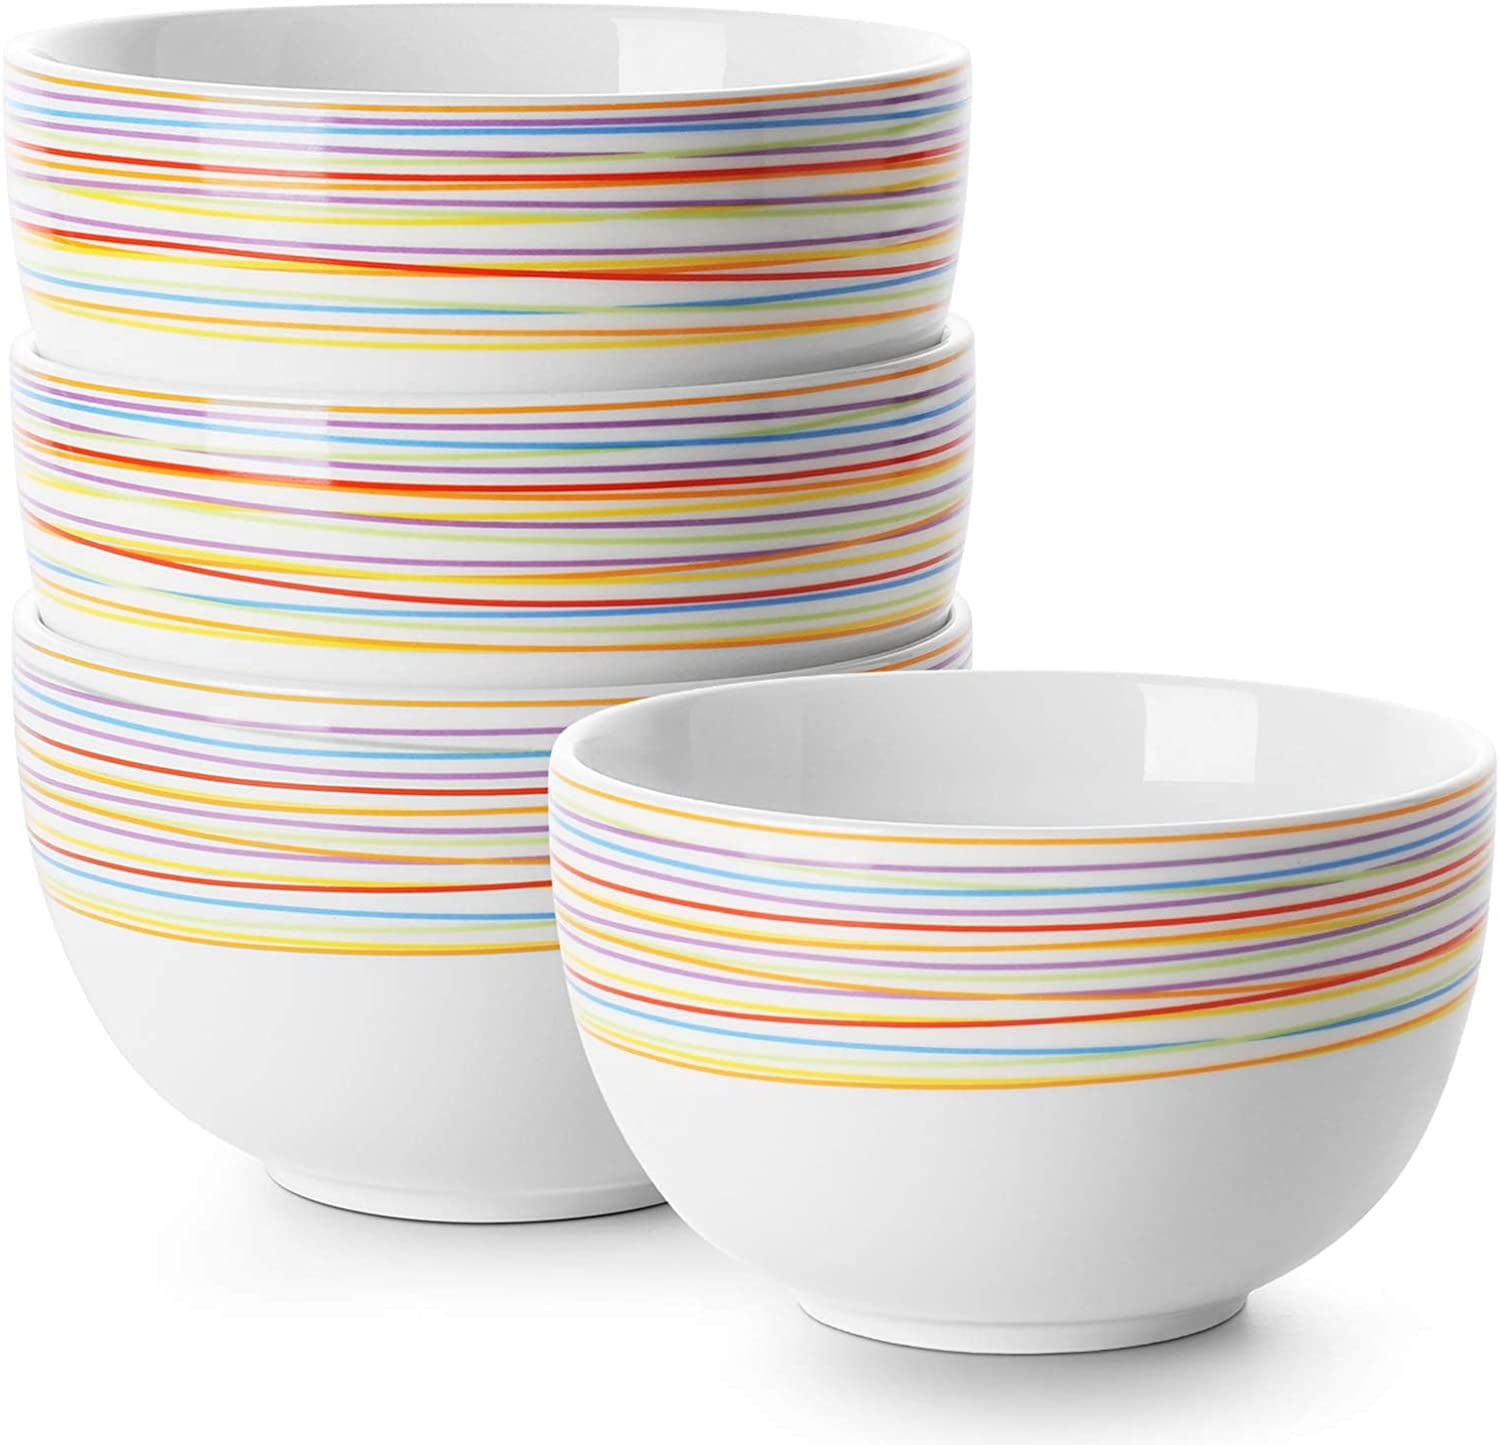 Salad DOWAN 3 Packs Porcelain Soup Bowls Airy Blue 32 Ounces for Cereal and Pasta Bowls 